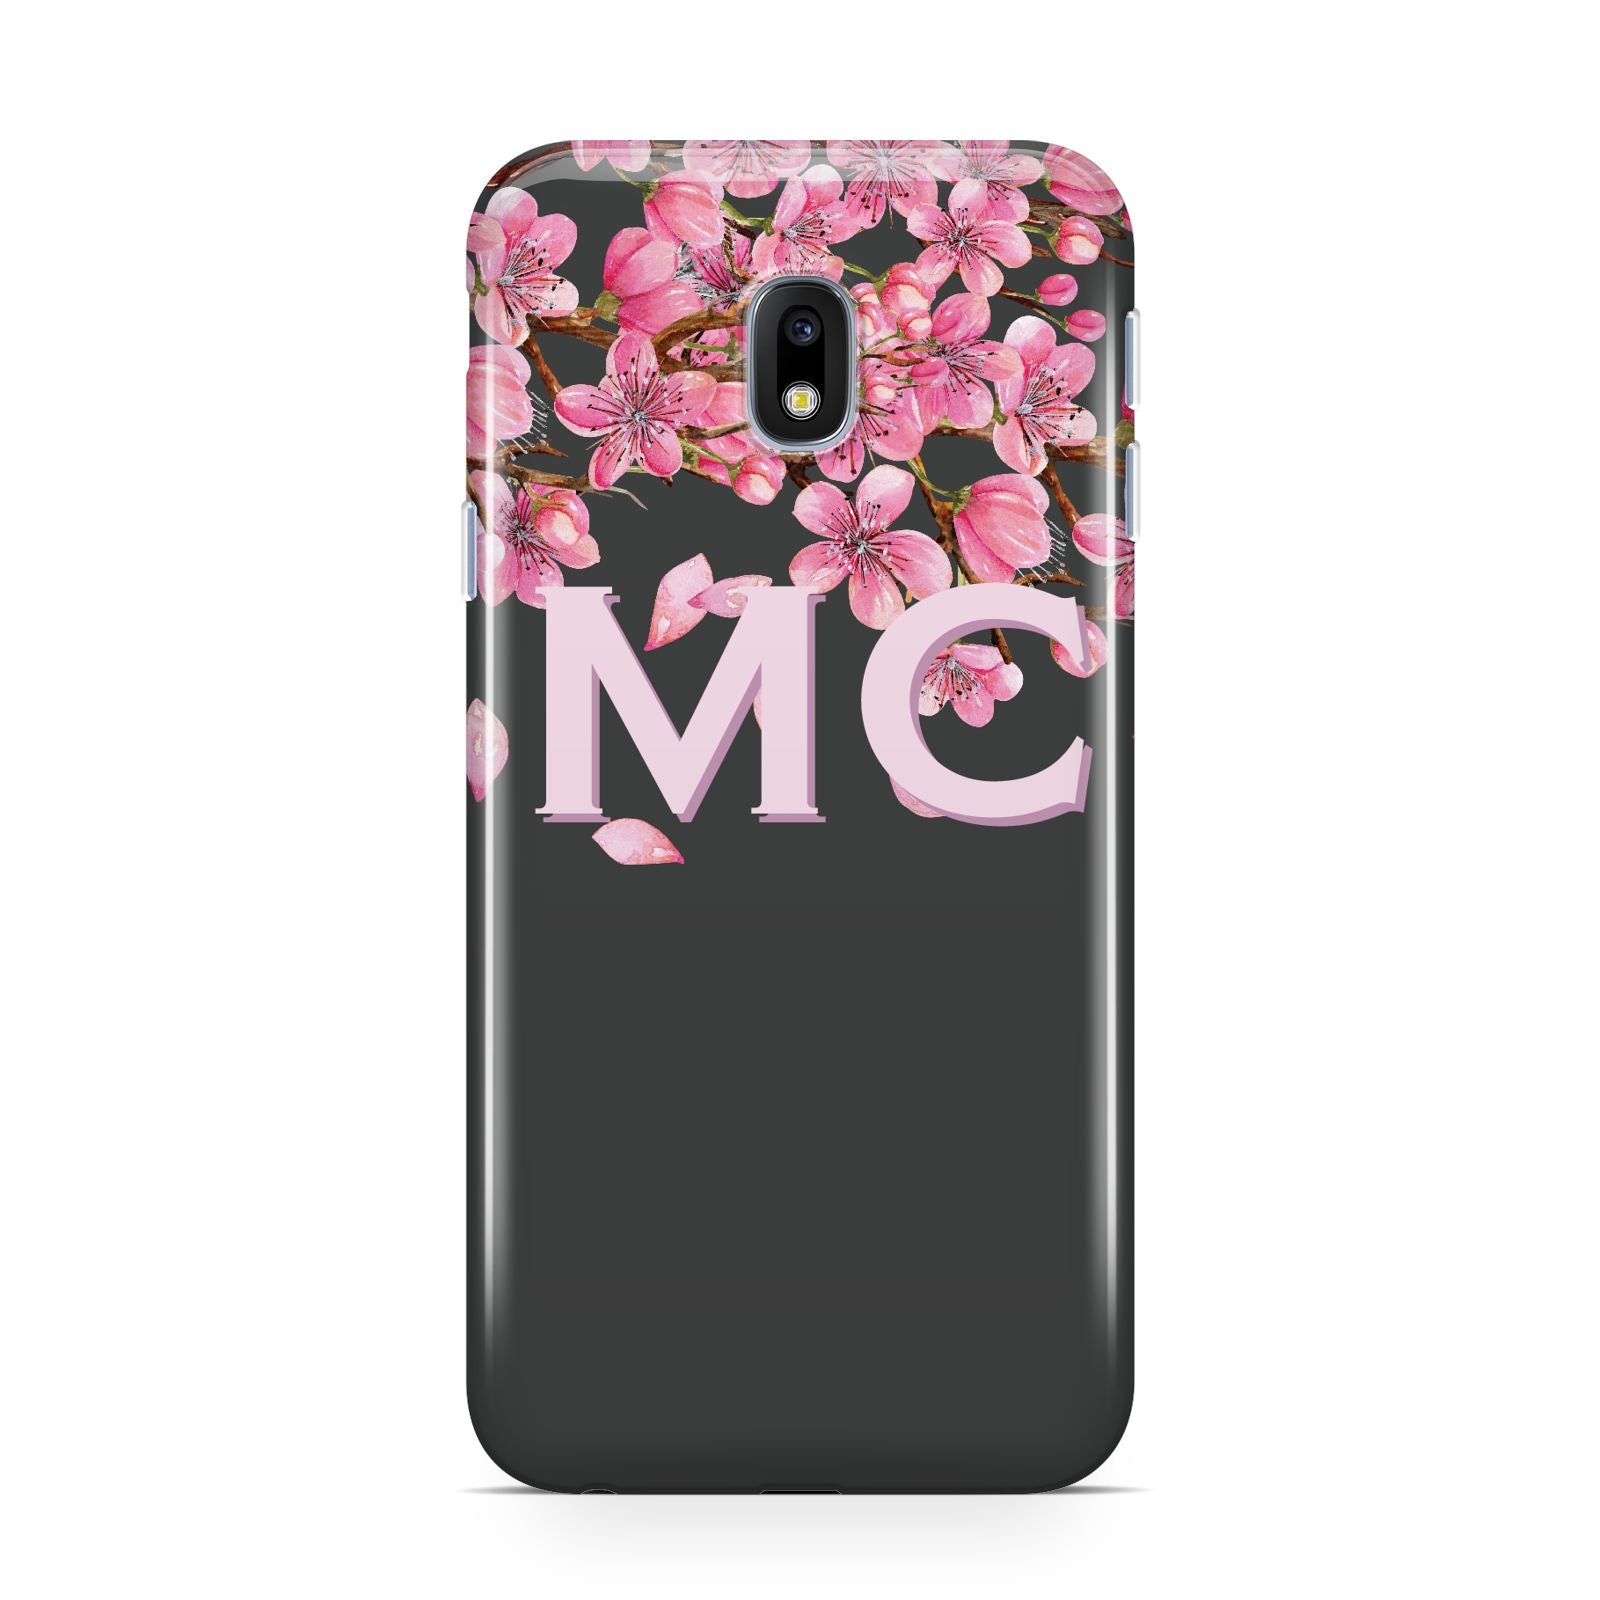 Personalised Floral Blossom Black Pink Samsung Galaxy J3 2017 Case